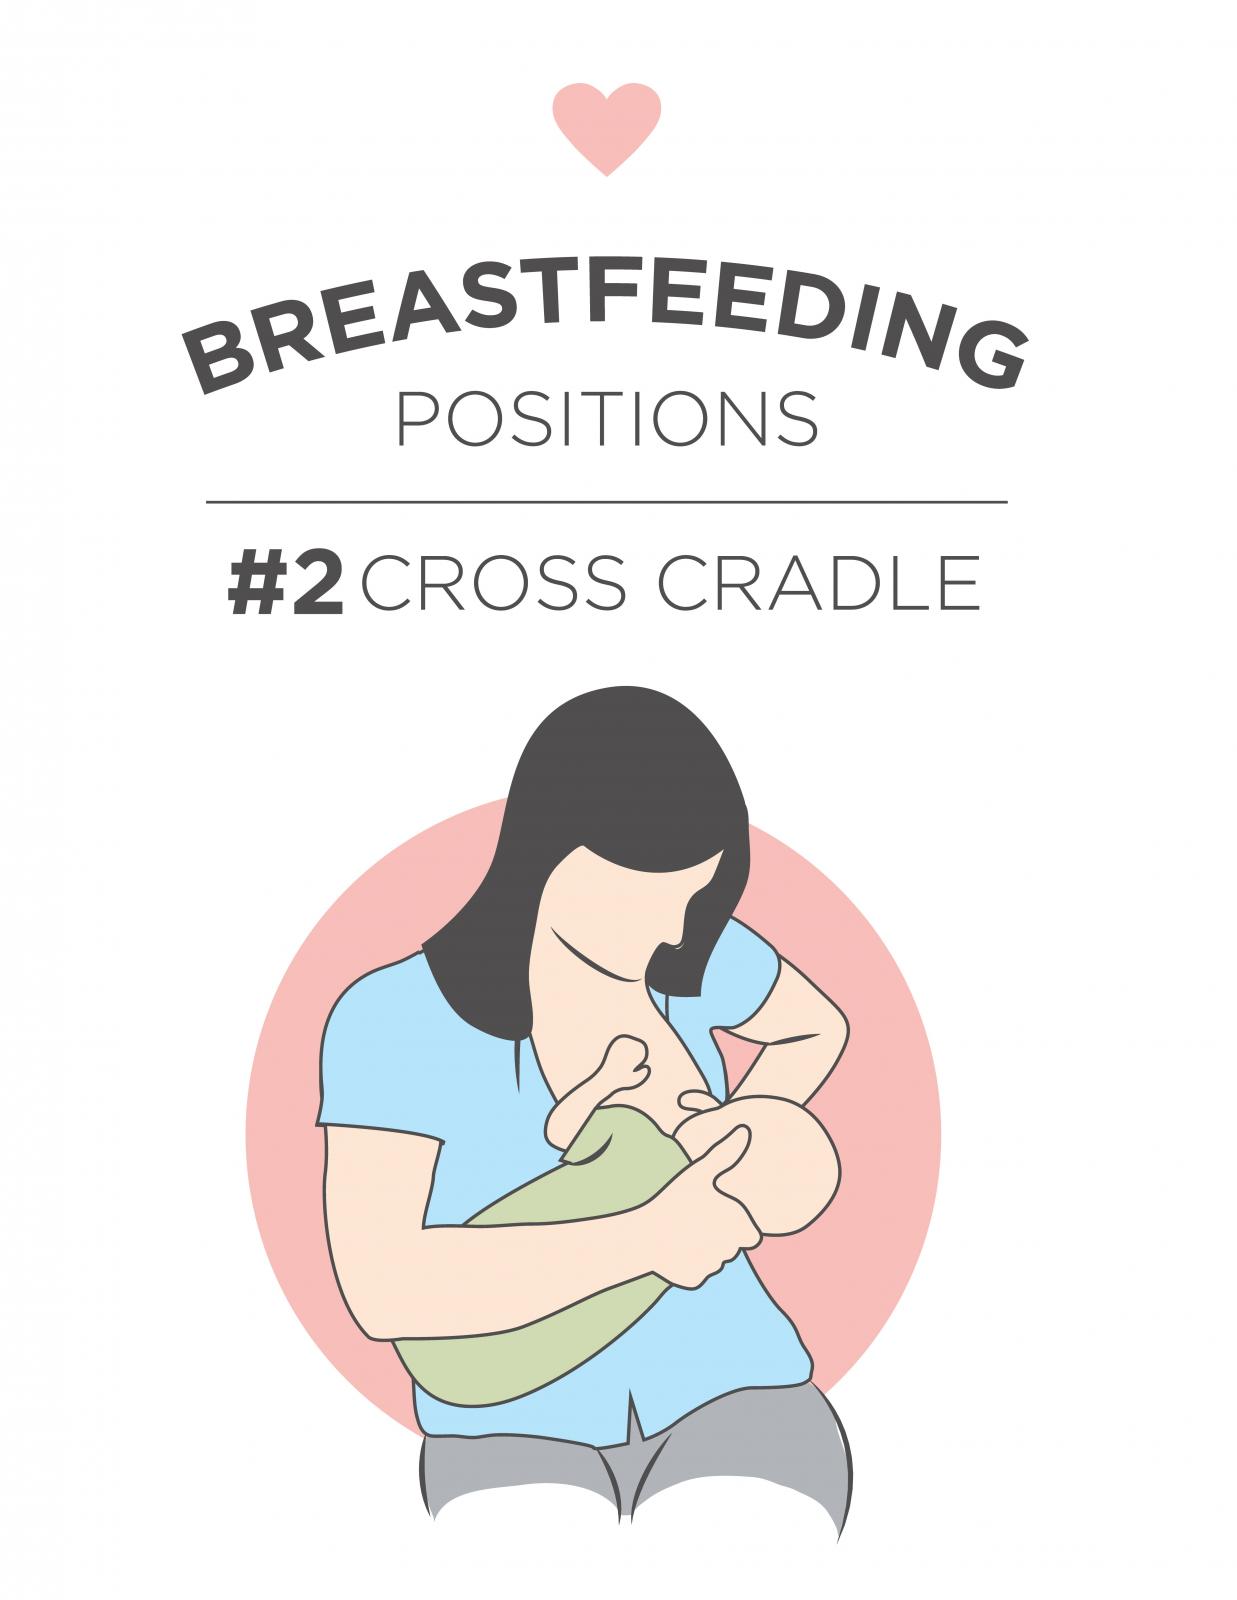 cross cradle hold_small